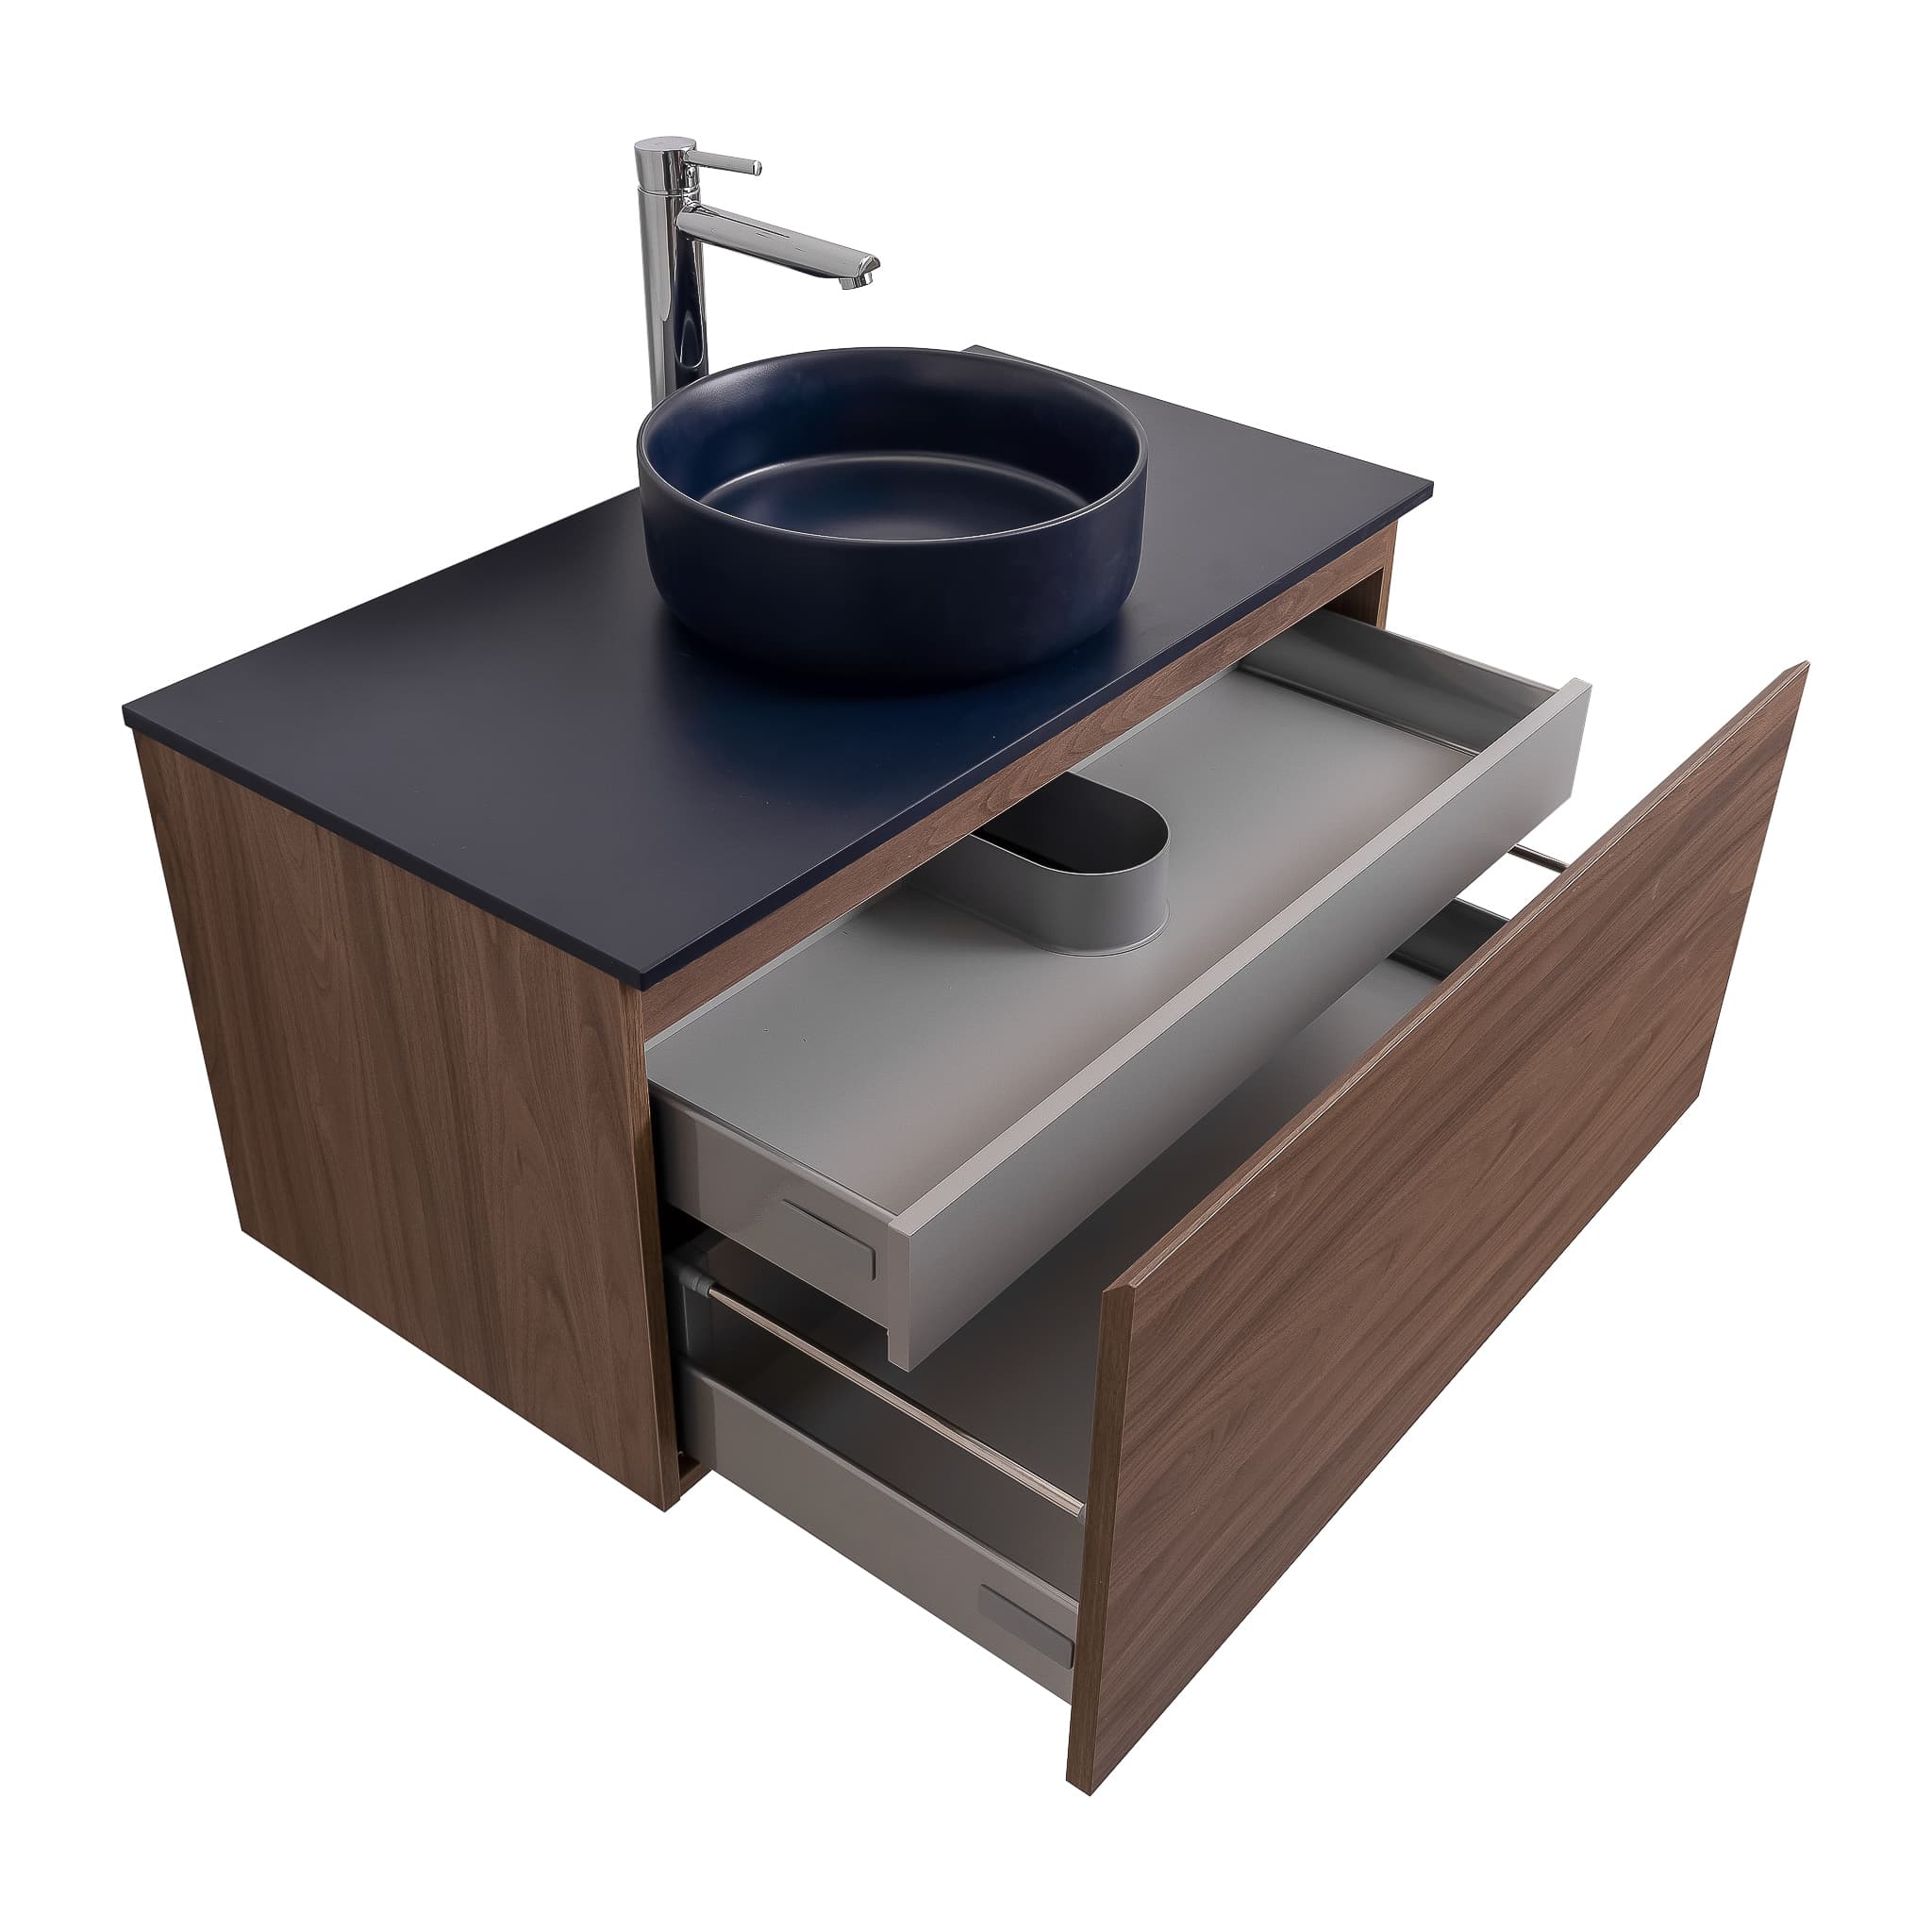 Venice 39.5 Walnut Wood Texture Cabinet, Ares Navy Blue Top And Ares Navy Blue Ceramic Basin, Wall Mounted Modern Vanity Set